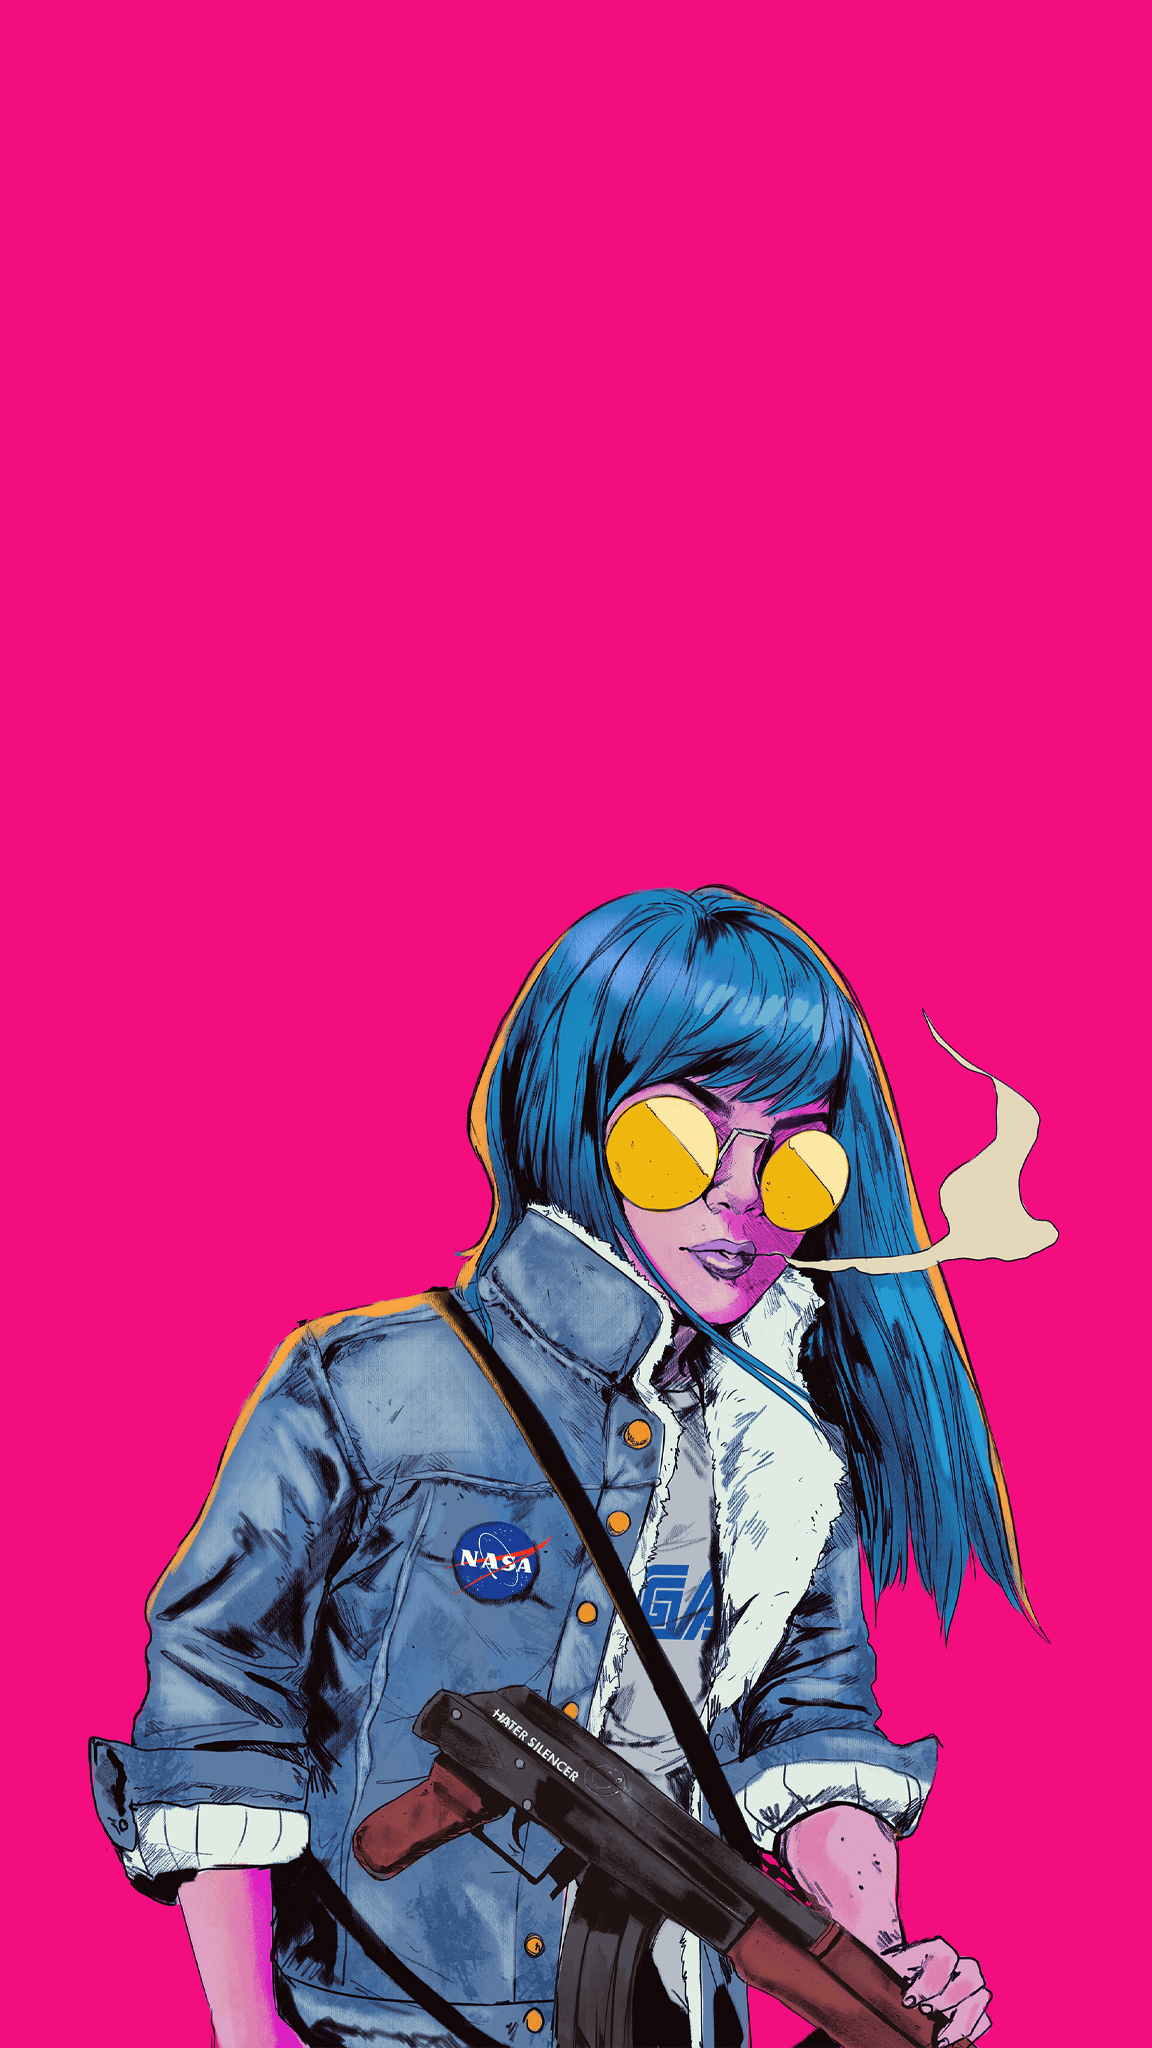 A girl with blue hair and sunglasses holding an automatic weapon - Punk, NASA